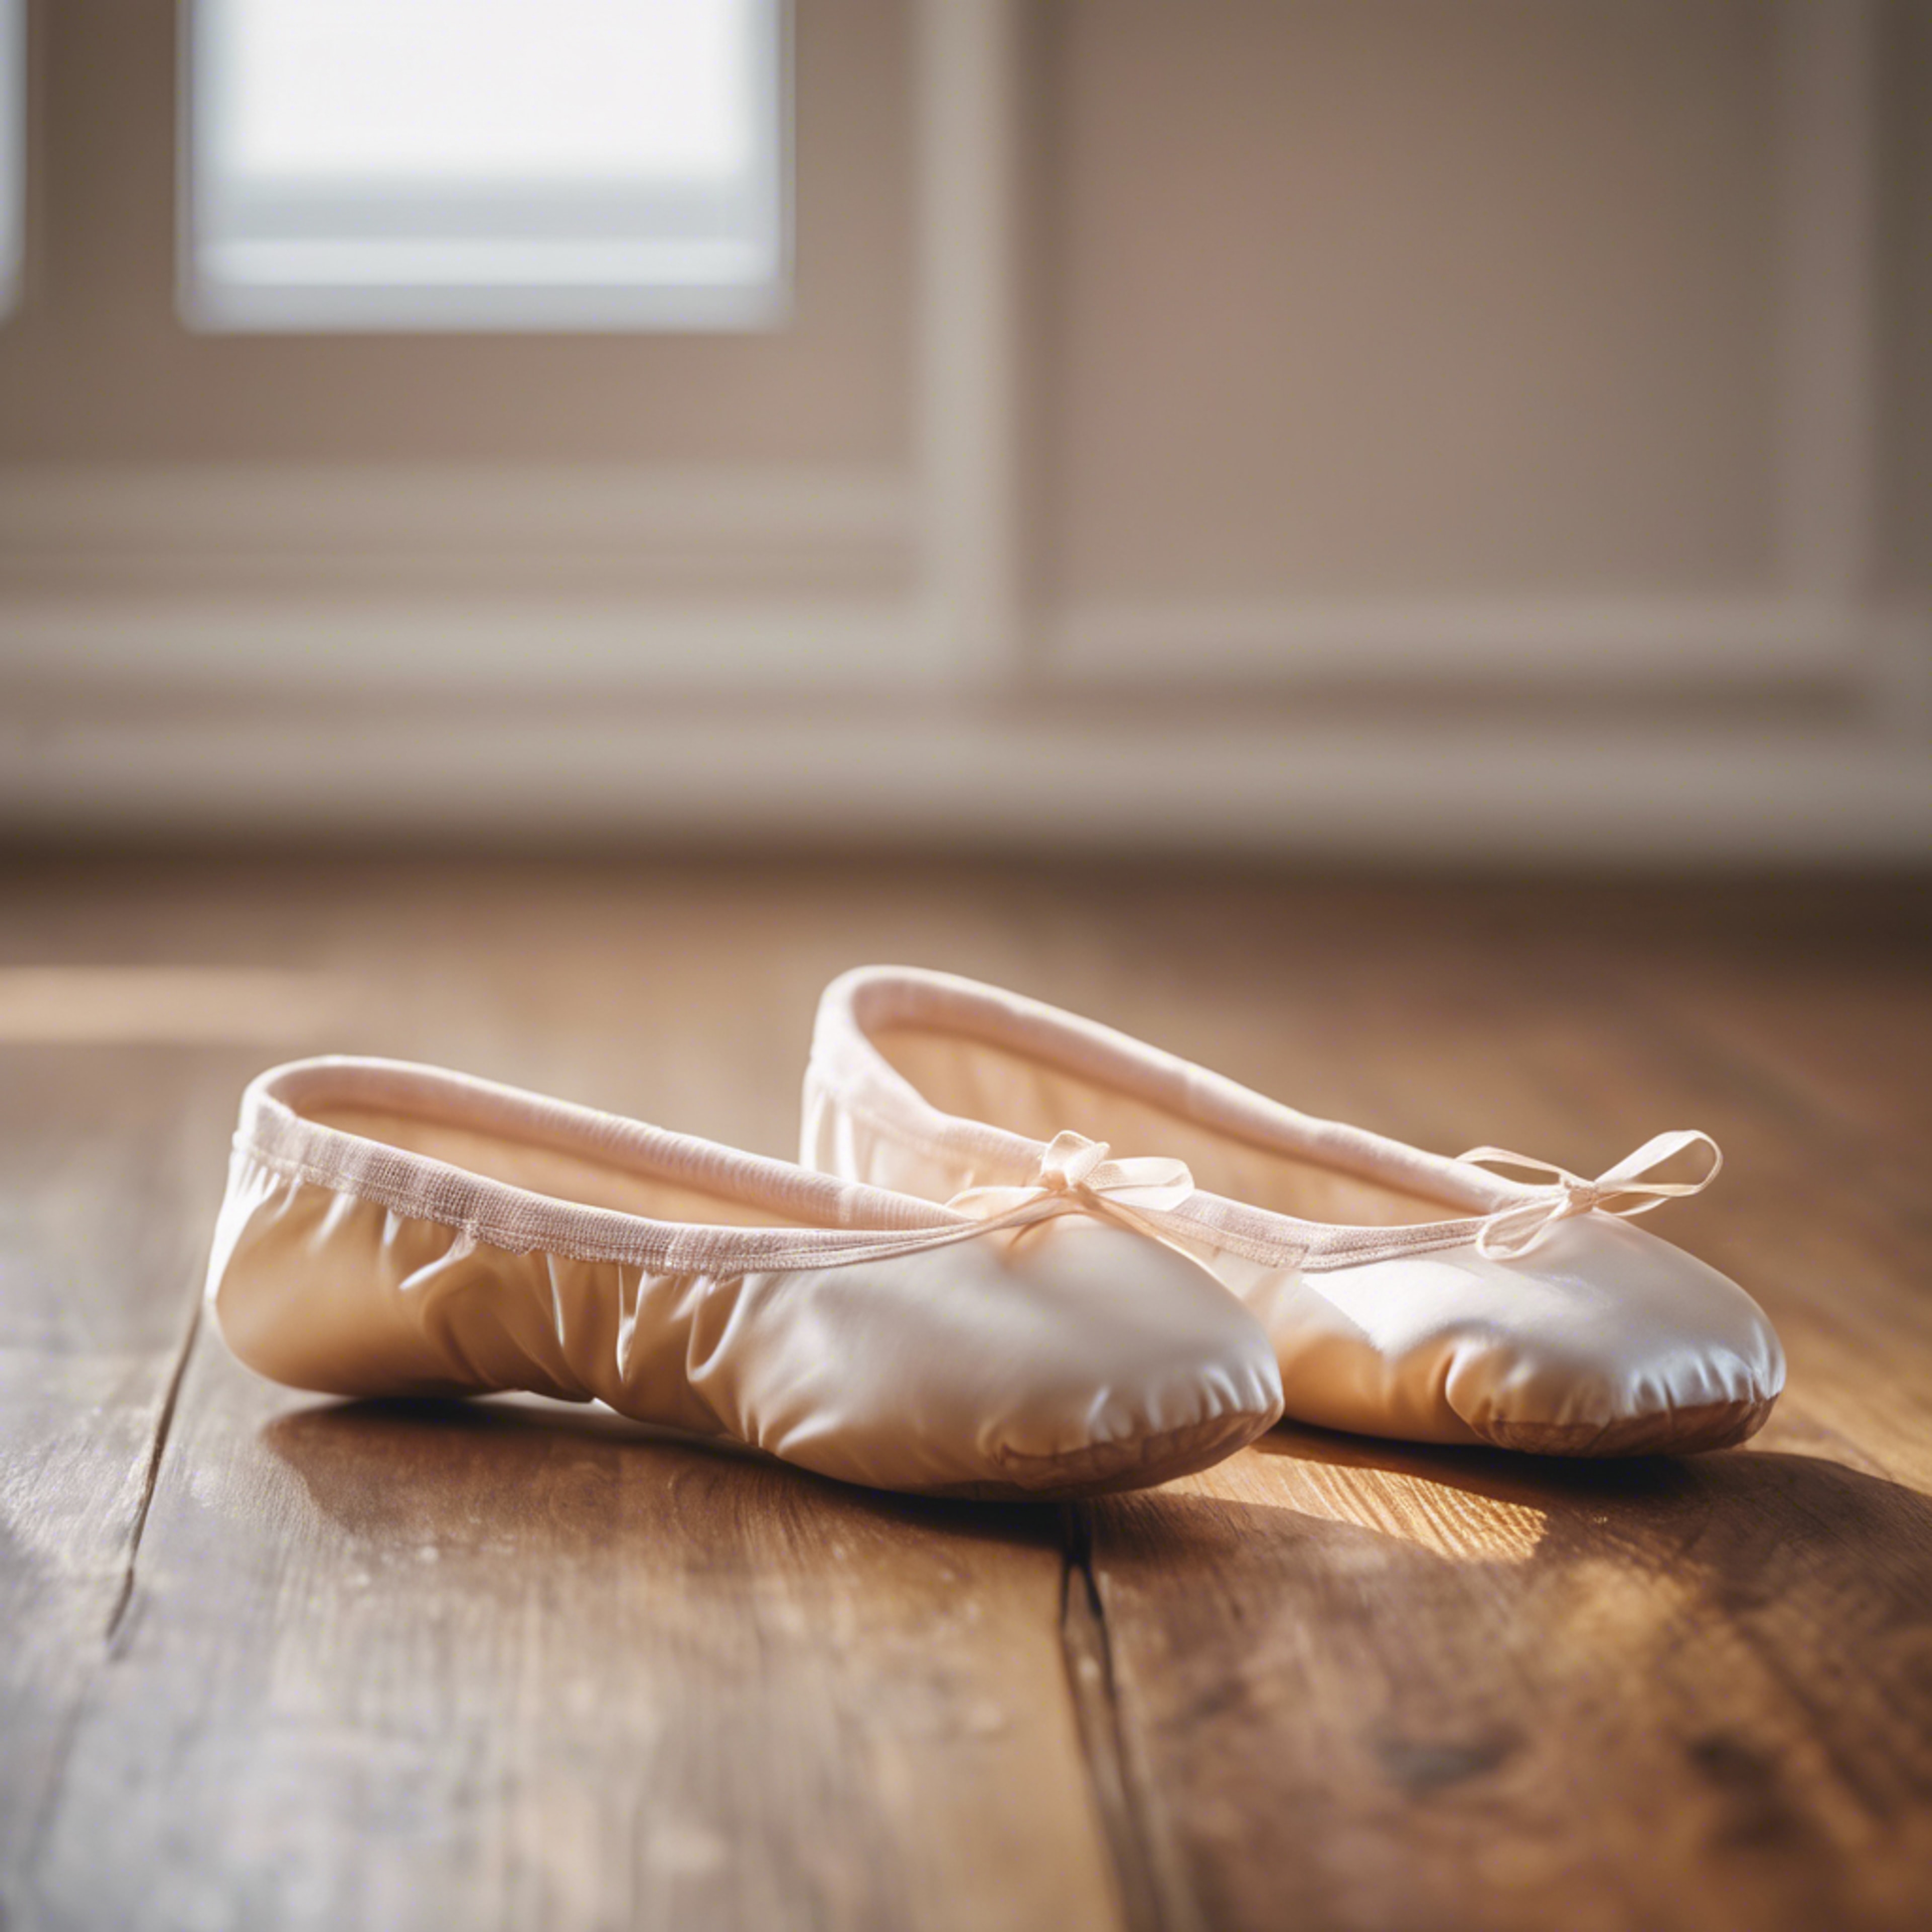 Close up of a pair of cream-colored ballet slippers on a hardwood floor.壁紙[4efd7208256149a9b923]